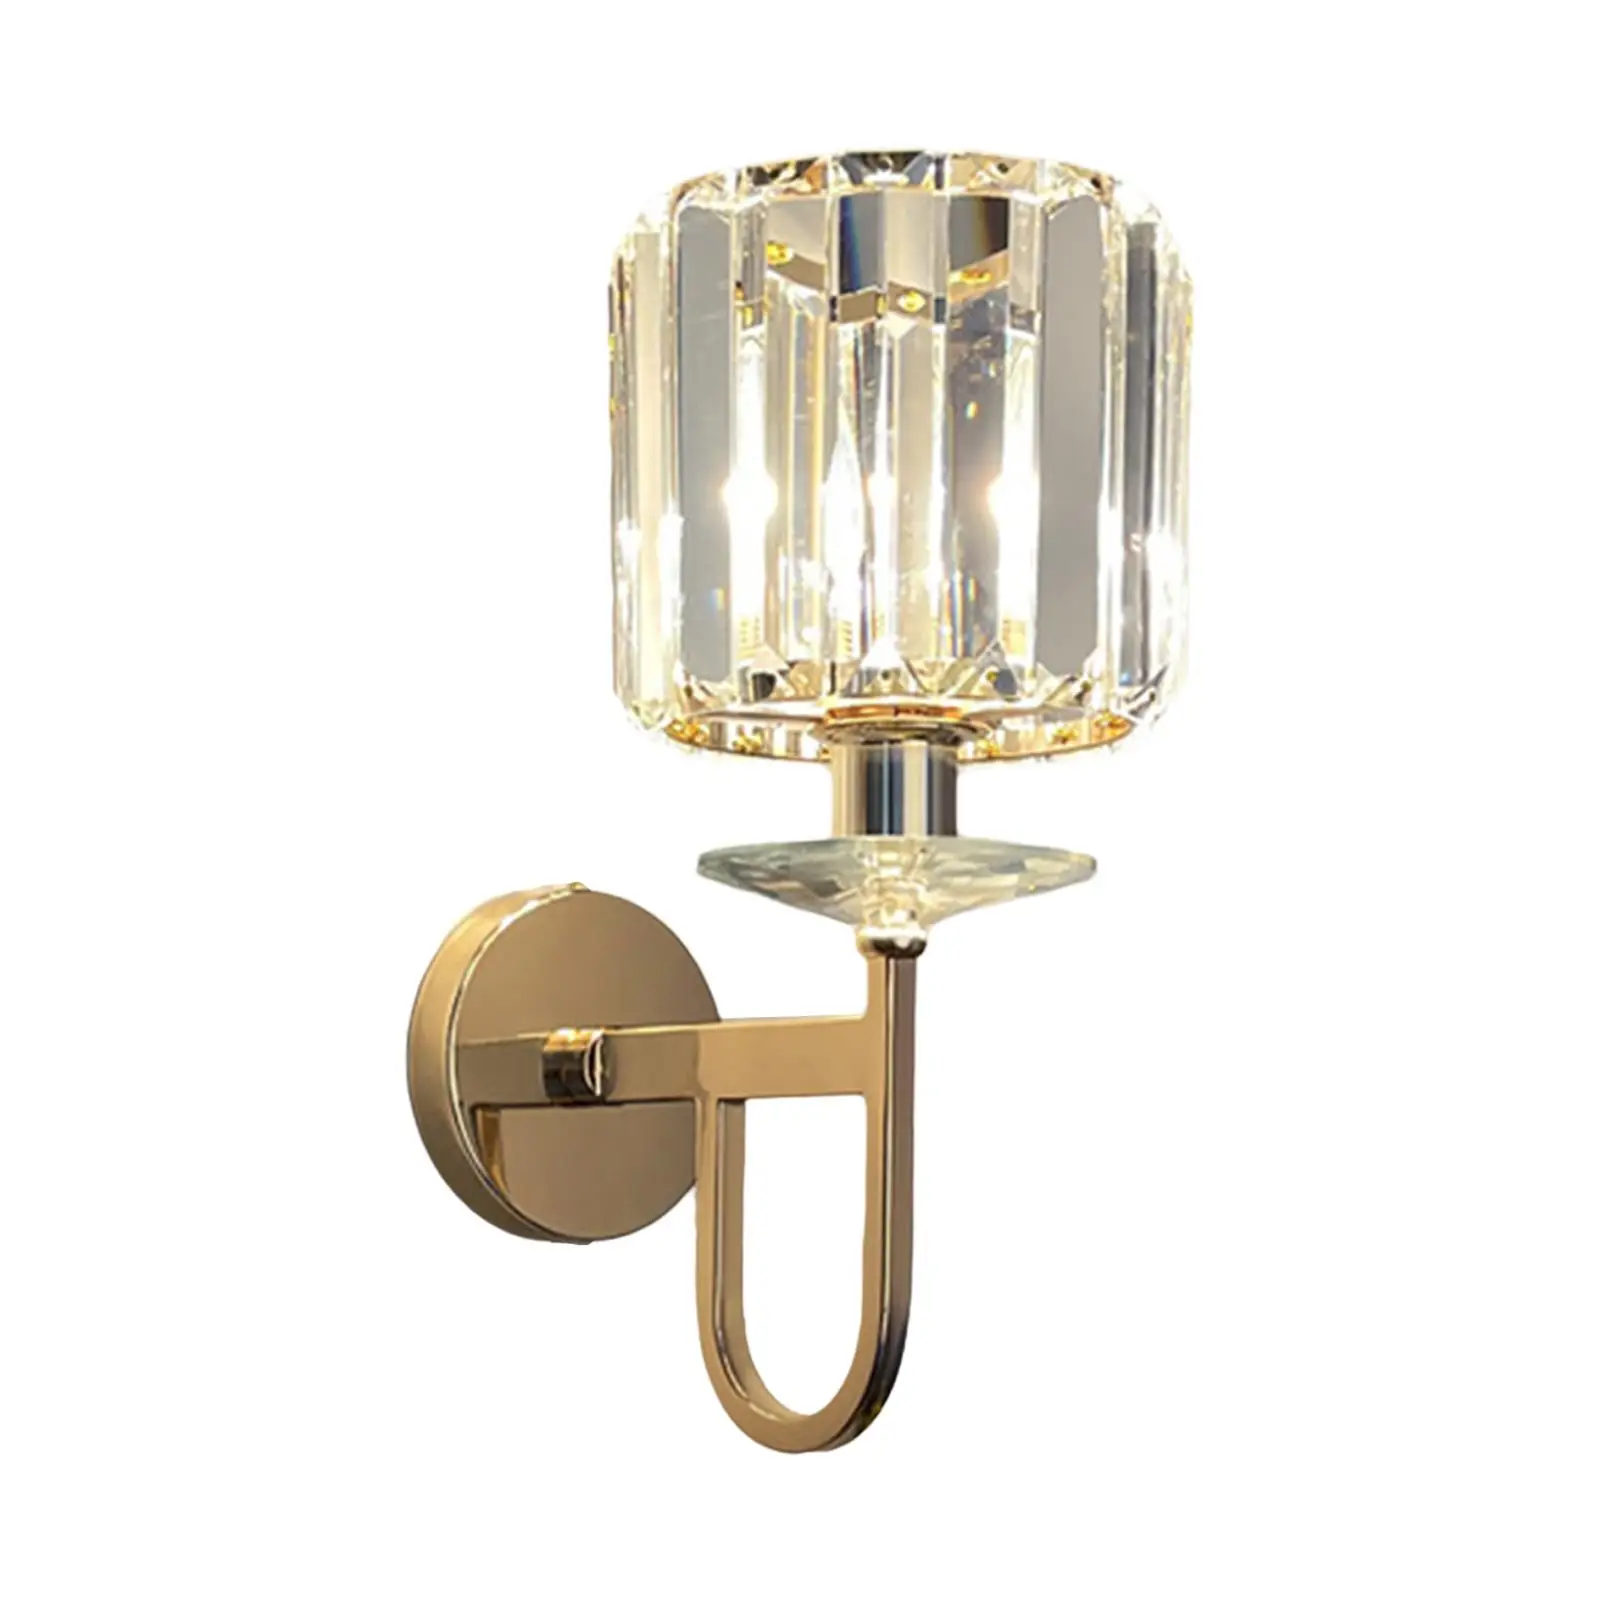 Wall Sconce Light Modern Bedside Lighting Fixtures Bathroom Sconces Plug in Cord for Dining Room Porch Office Kitchen Loft